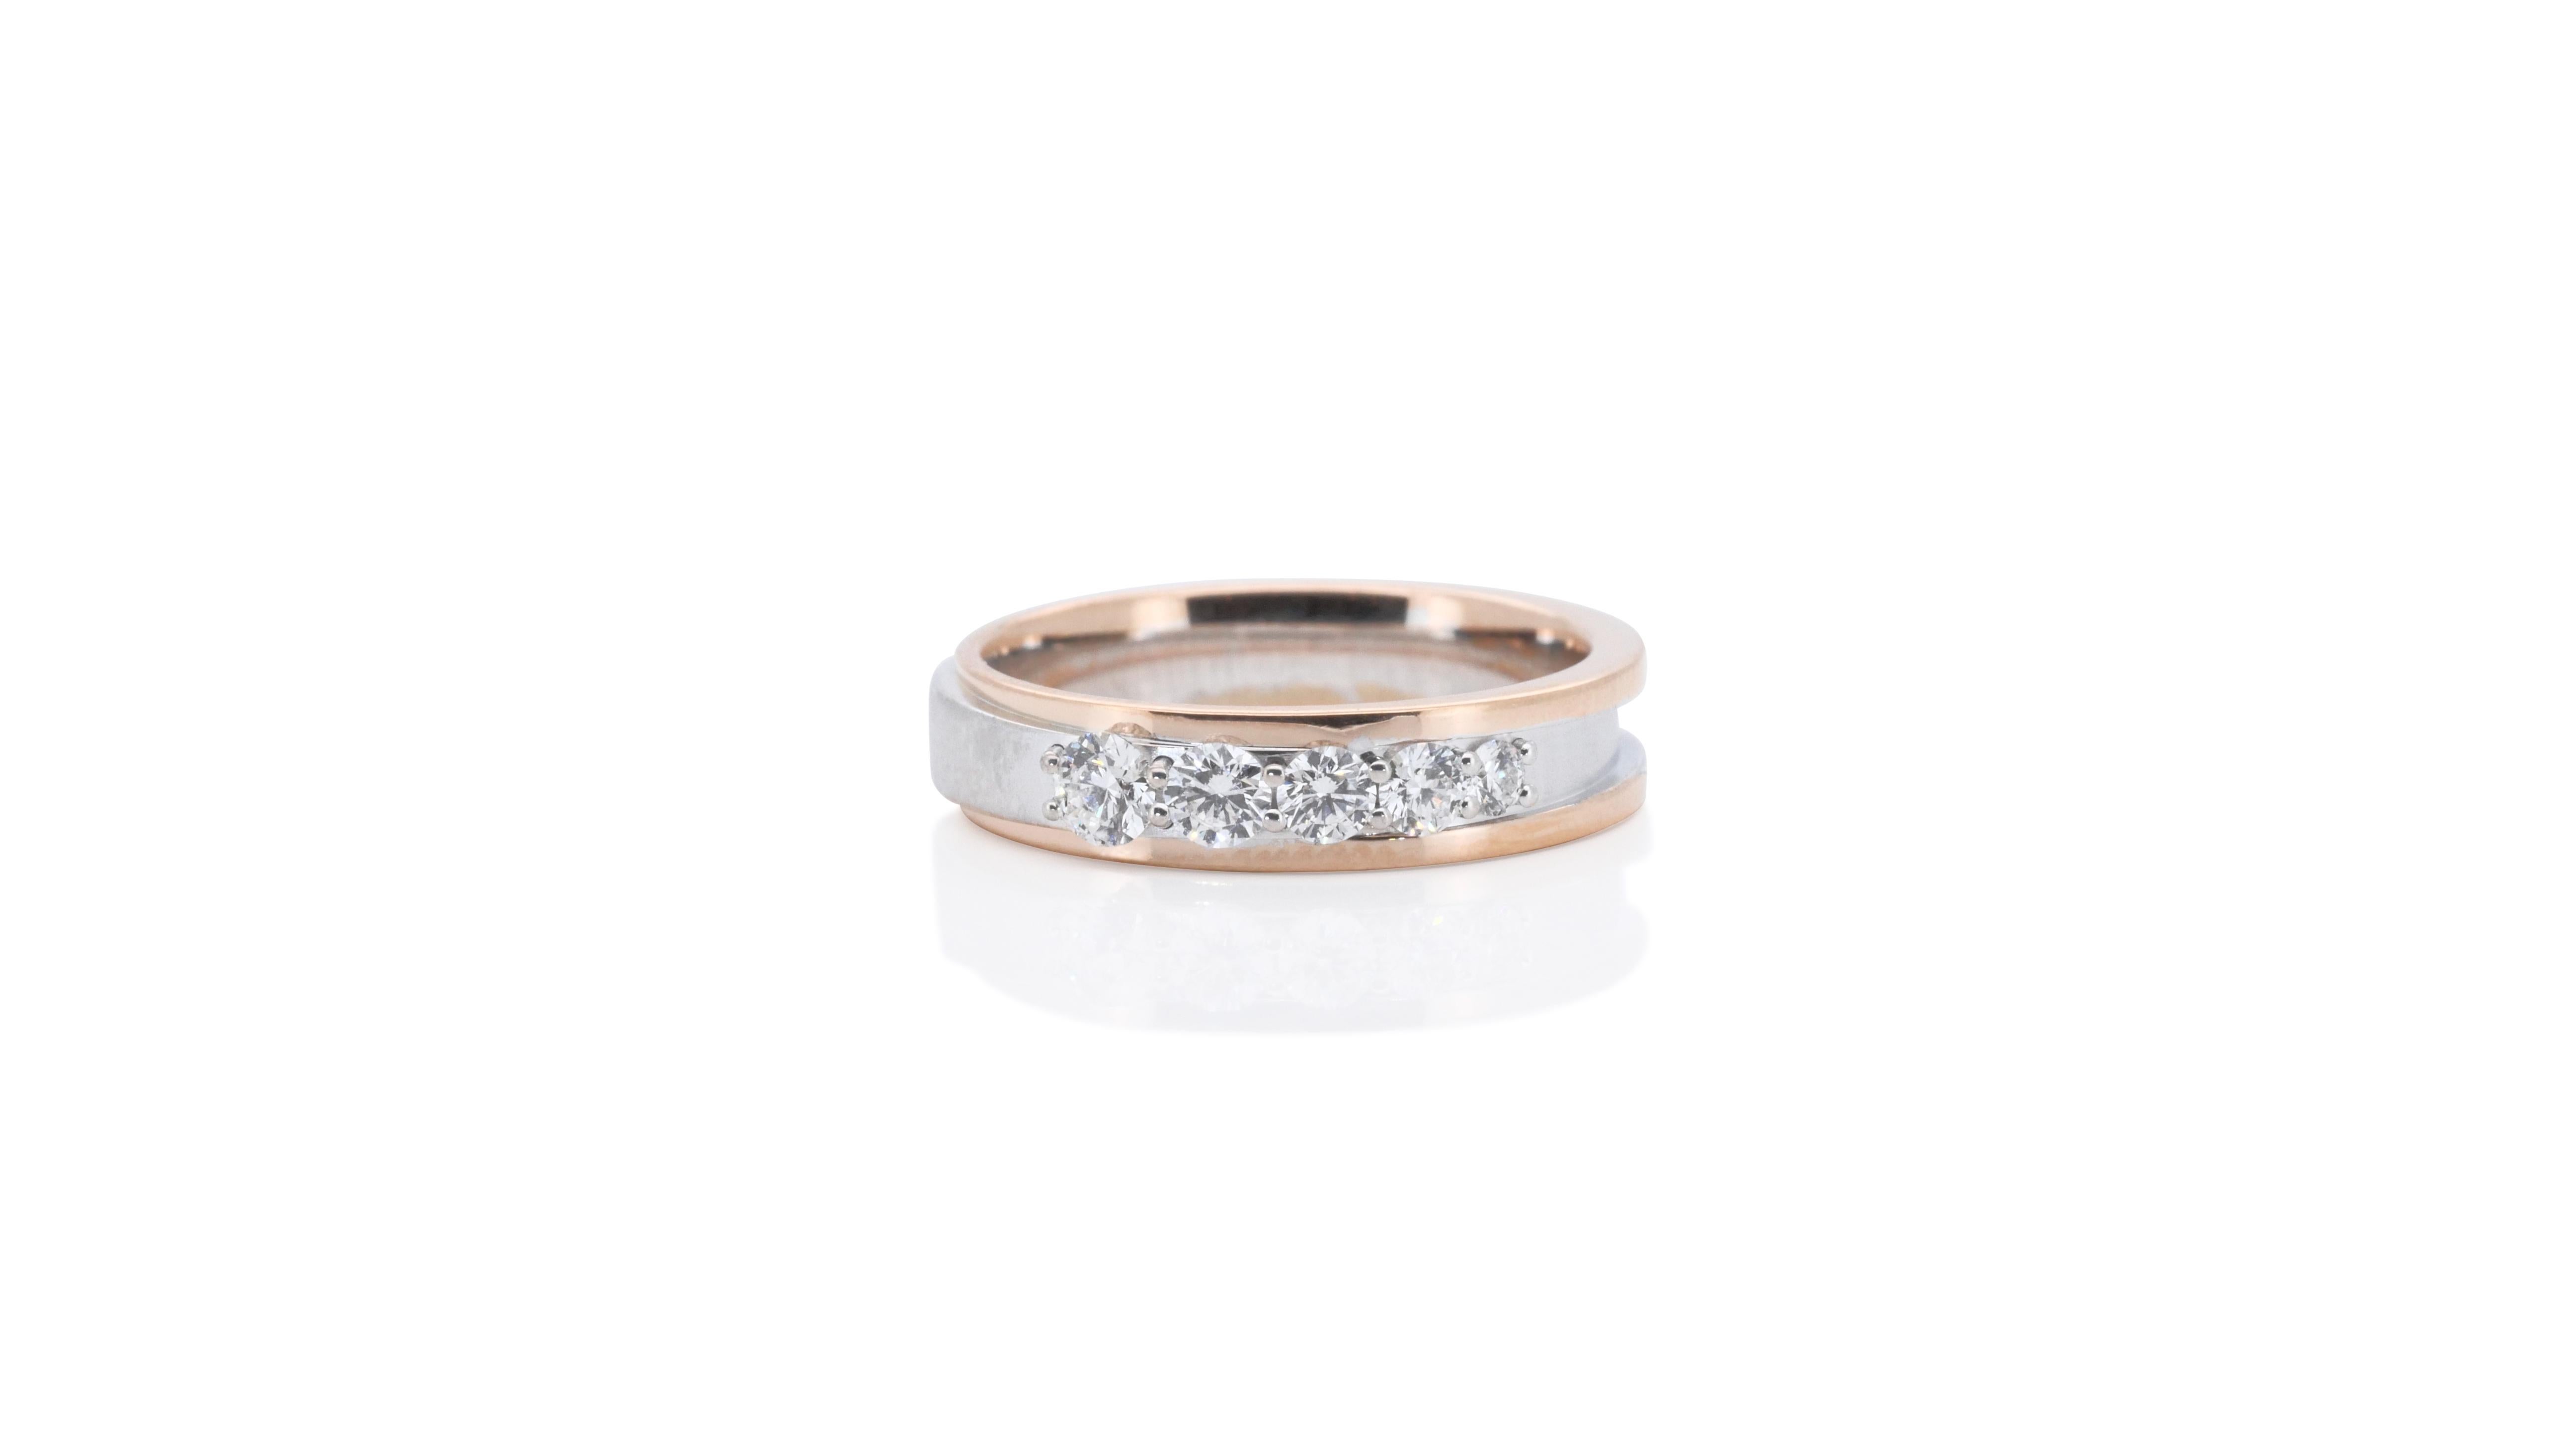 A beautiful five-stone wedding band ring with dazzling 0.23 carat round brilliant diamonds. The jewelry is made of 18k white gold and rose gold with a high quality polish. It comes with a fancy jewelry box.

5 diamonds main stone of 0.23 carat
cut: